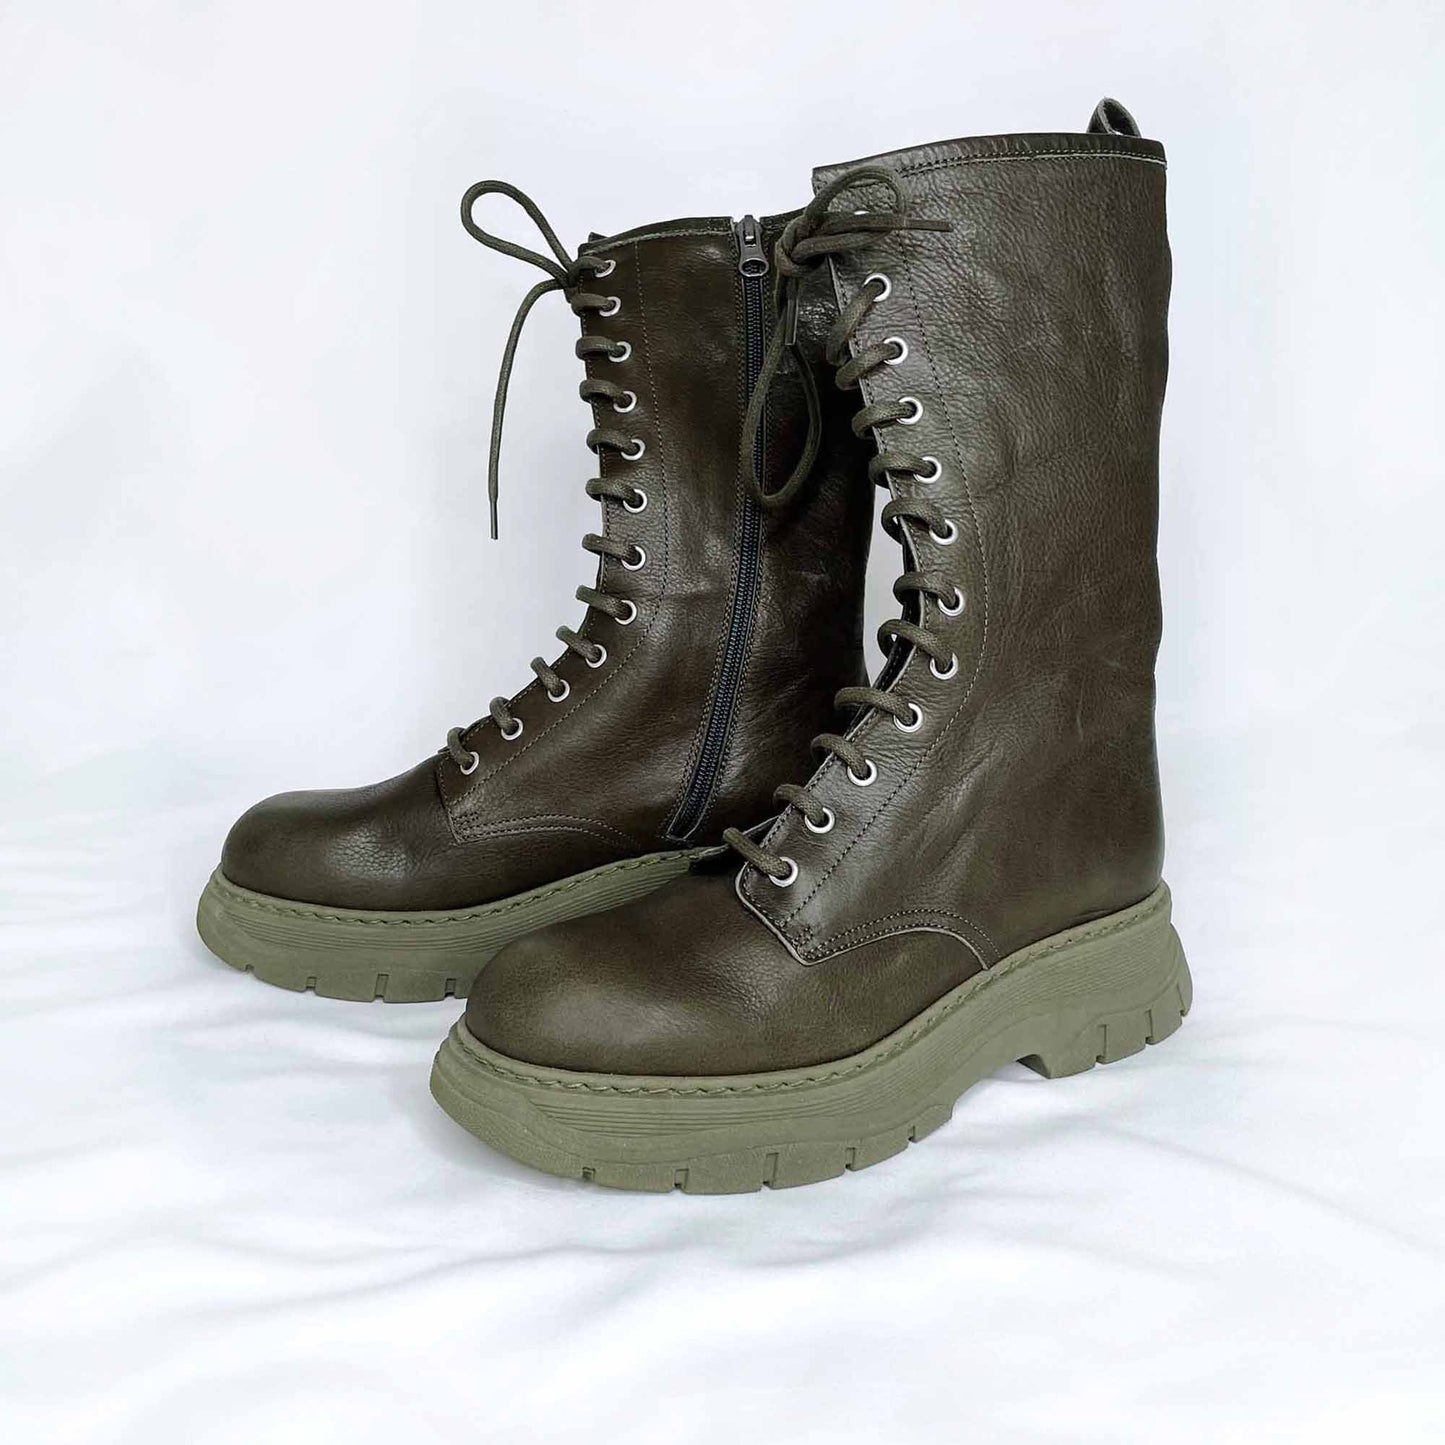 l'intervalle lug sole leather lace-up combat moto boot - size 38